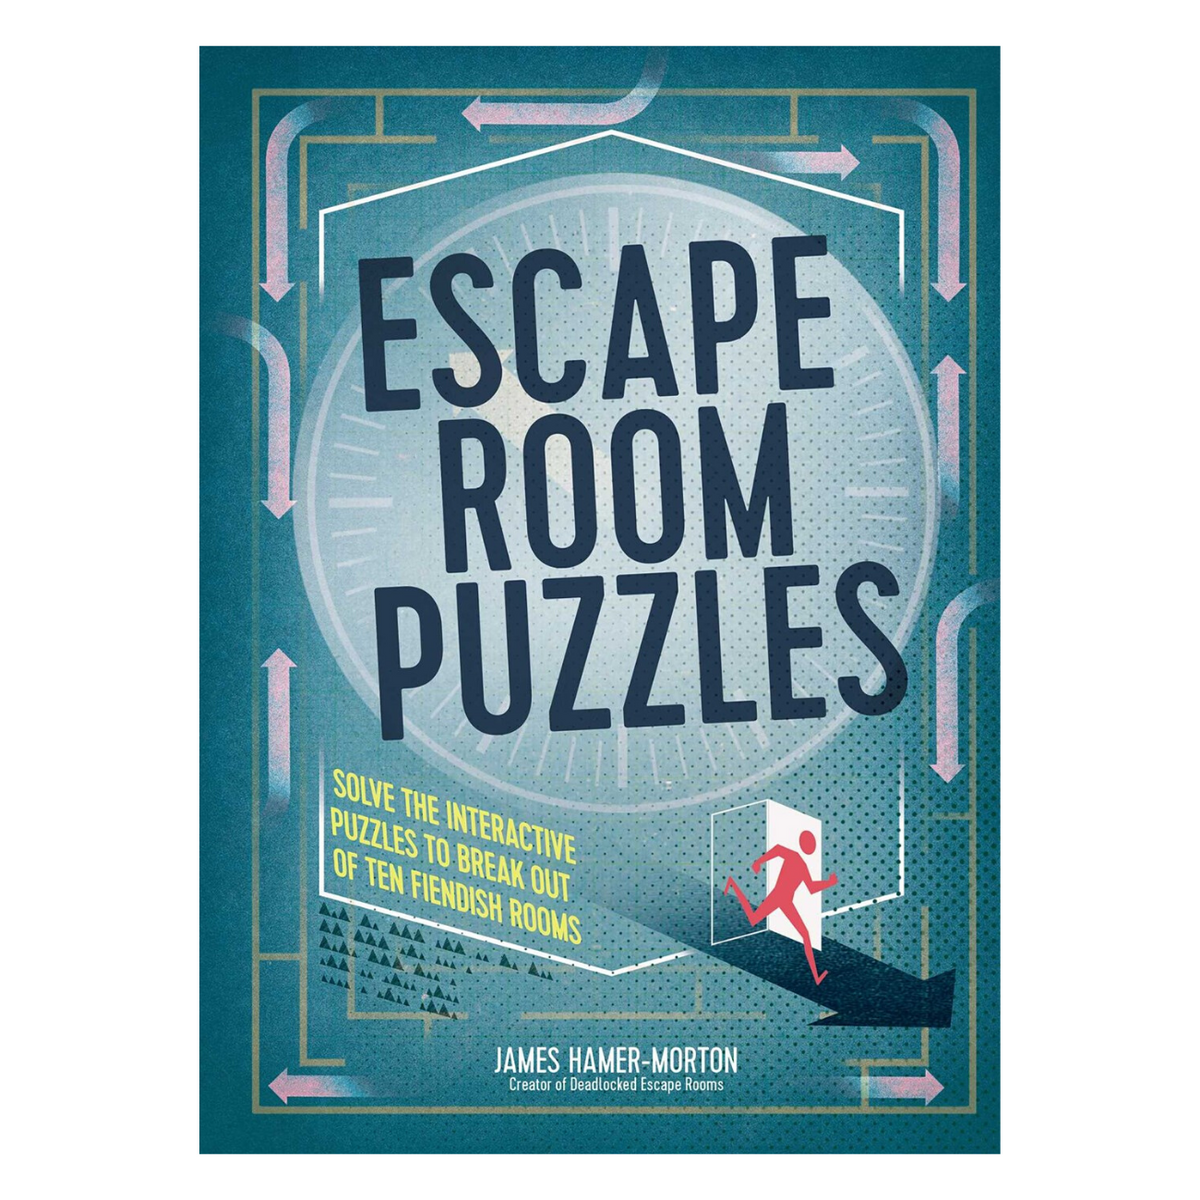 Escape Room Puzzles Child's Play